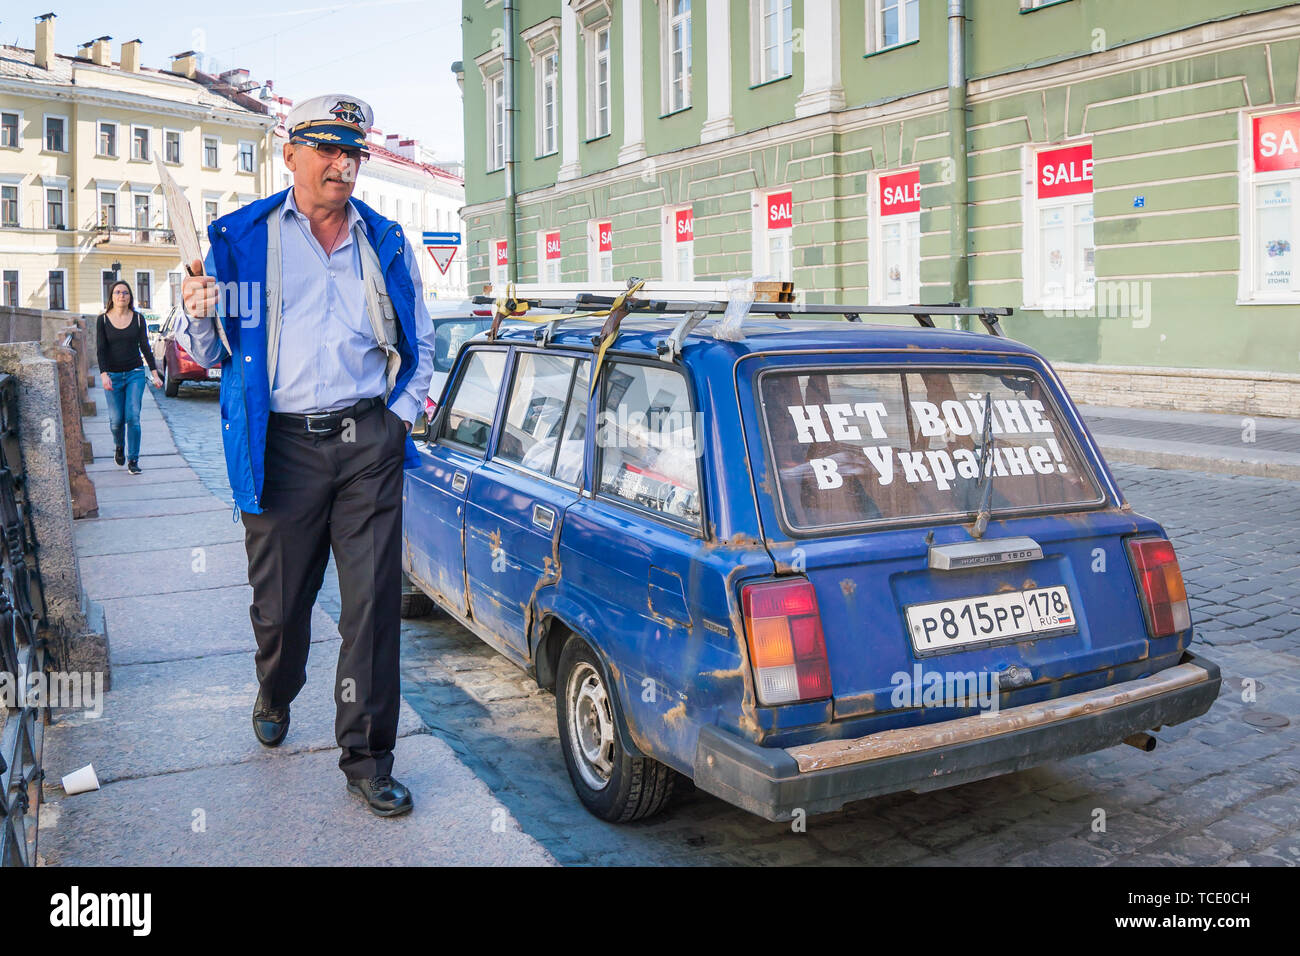 St.Peterburg, Russia - May 16, 2019 - an old car parked on a street with a sticker 'Say no to war in UKraine' Stock Photo